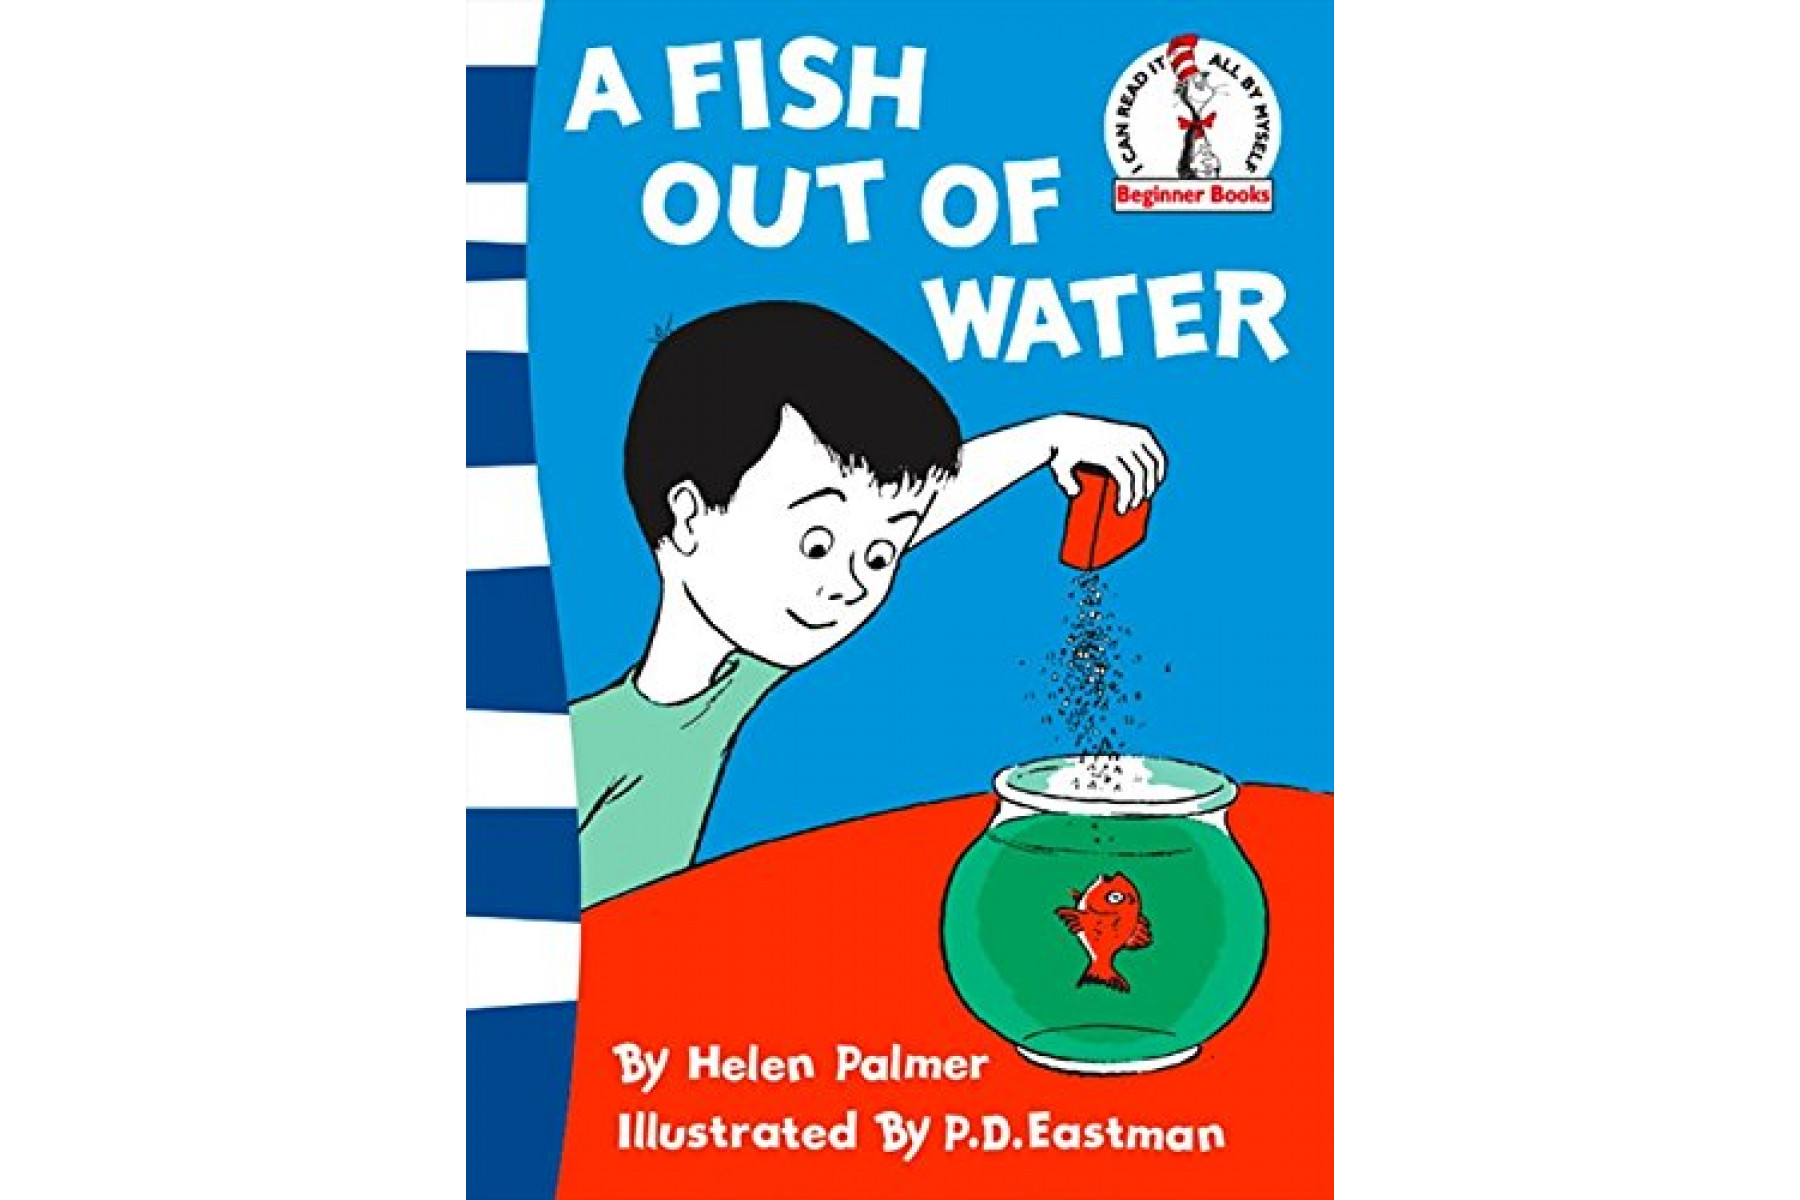 Like a fish out of. Fish out of Water. Beginner book. Palmer "a Fish out of Water". Be like a Fish out of Water.